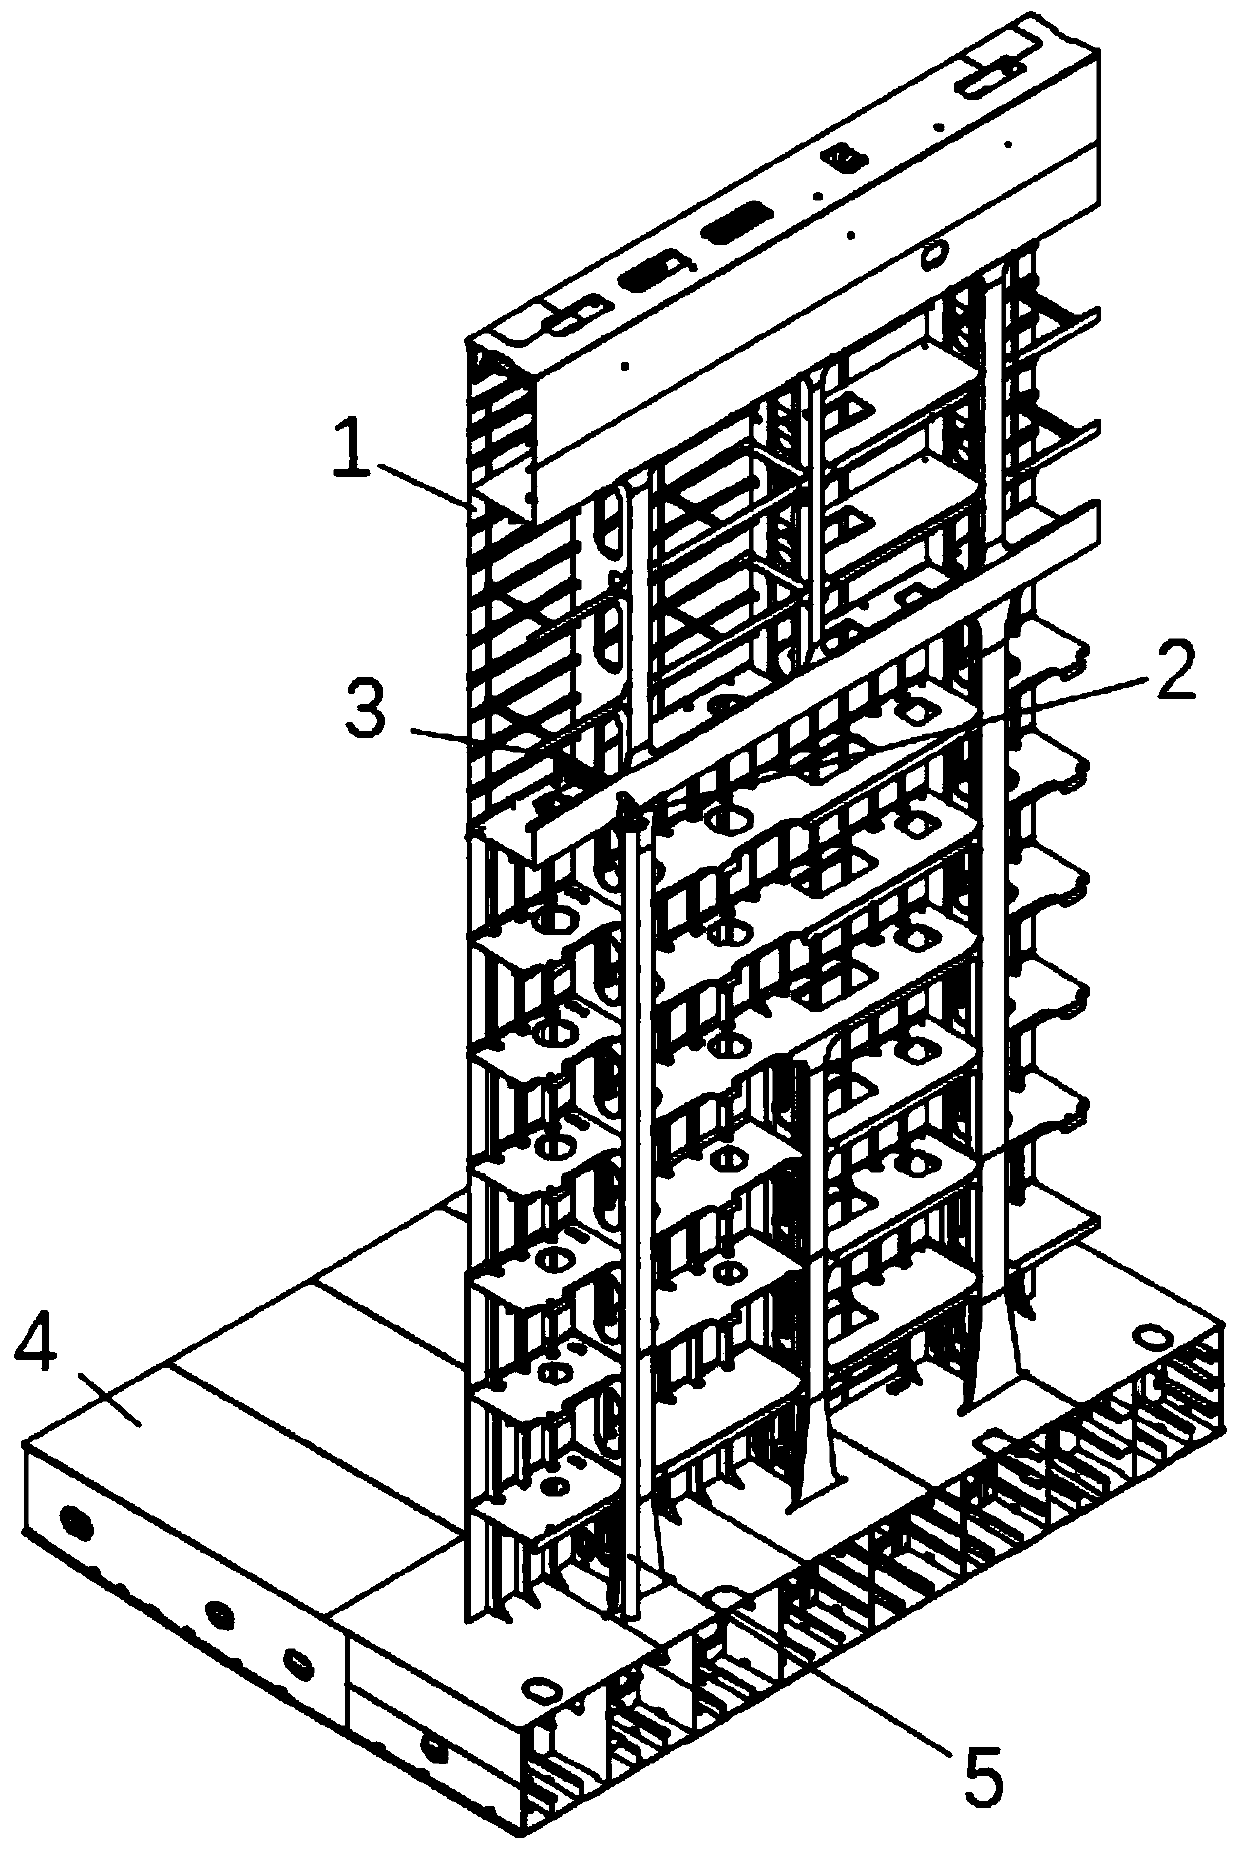 Method for carrying transverse bulkhead of ultra-large container ship